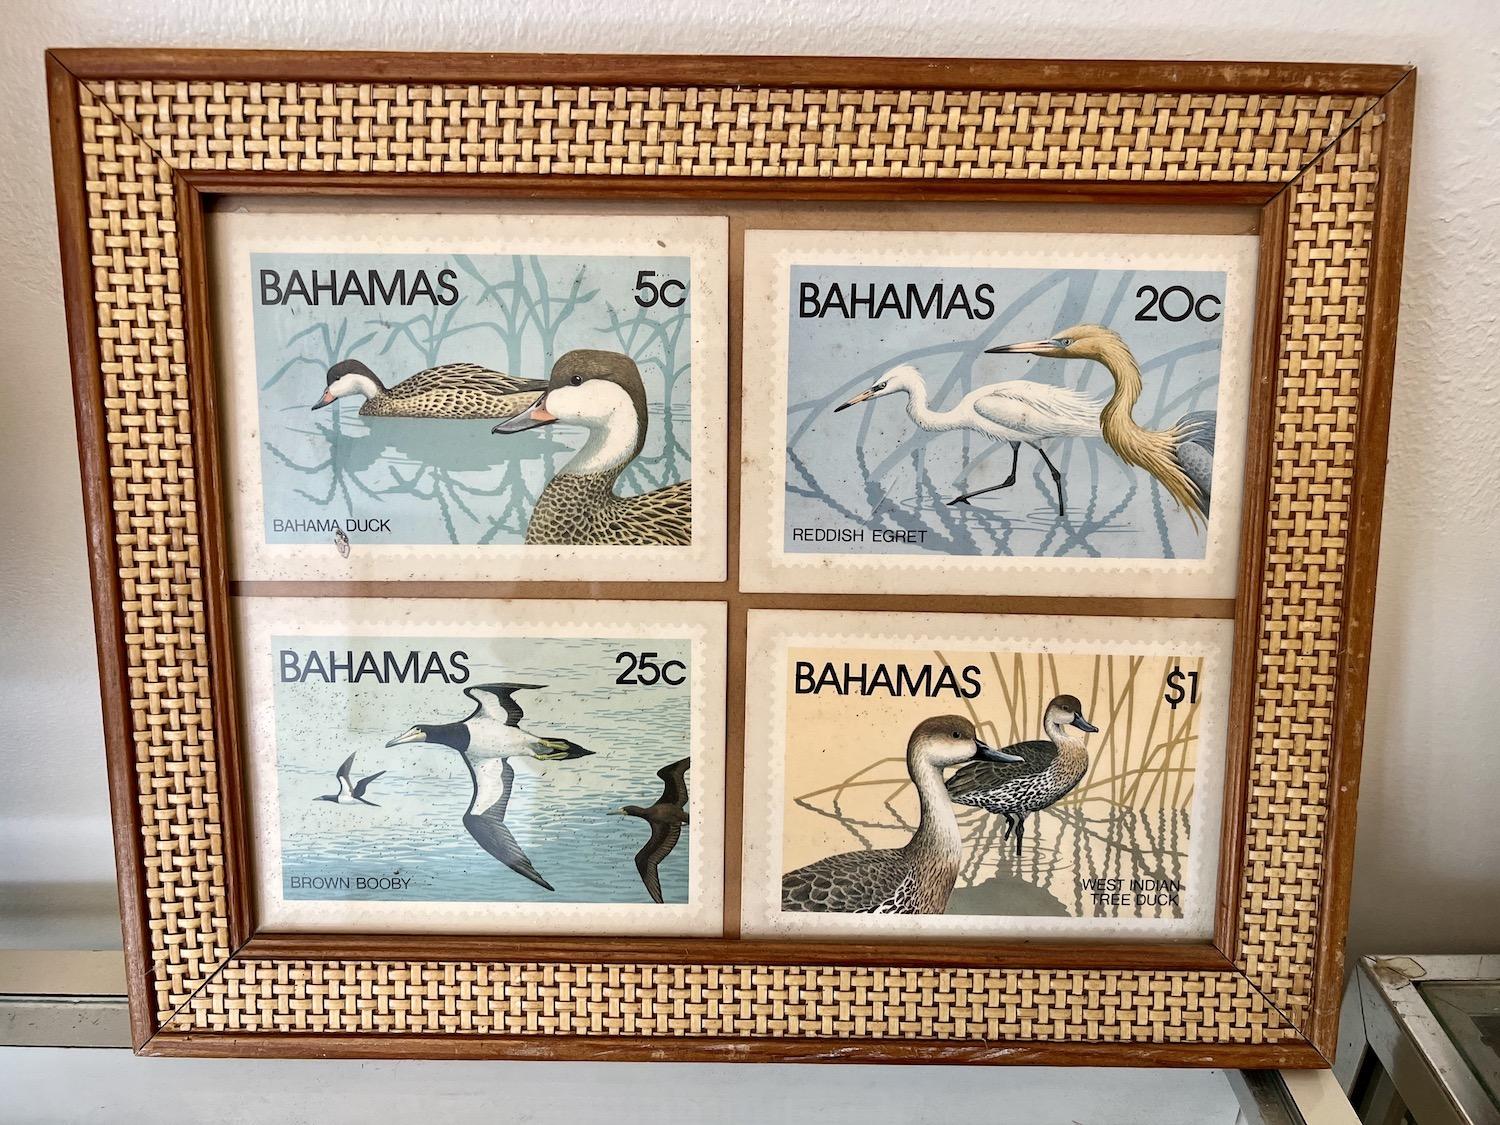 At the Rand Nature Centre, vintage stamps show birds found in the Bahamas.